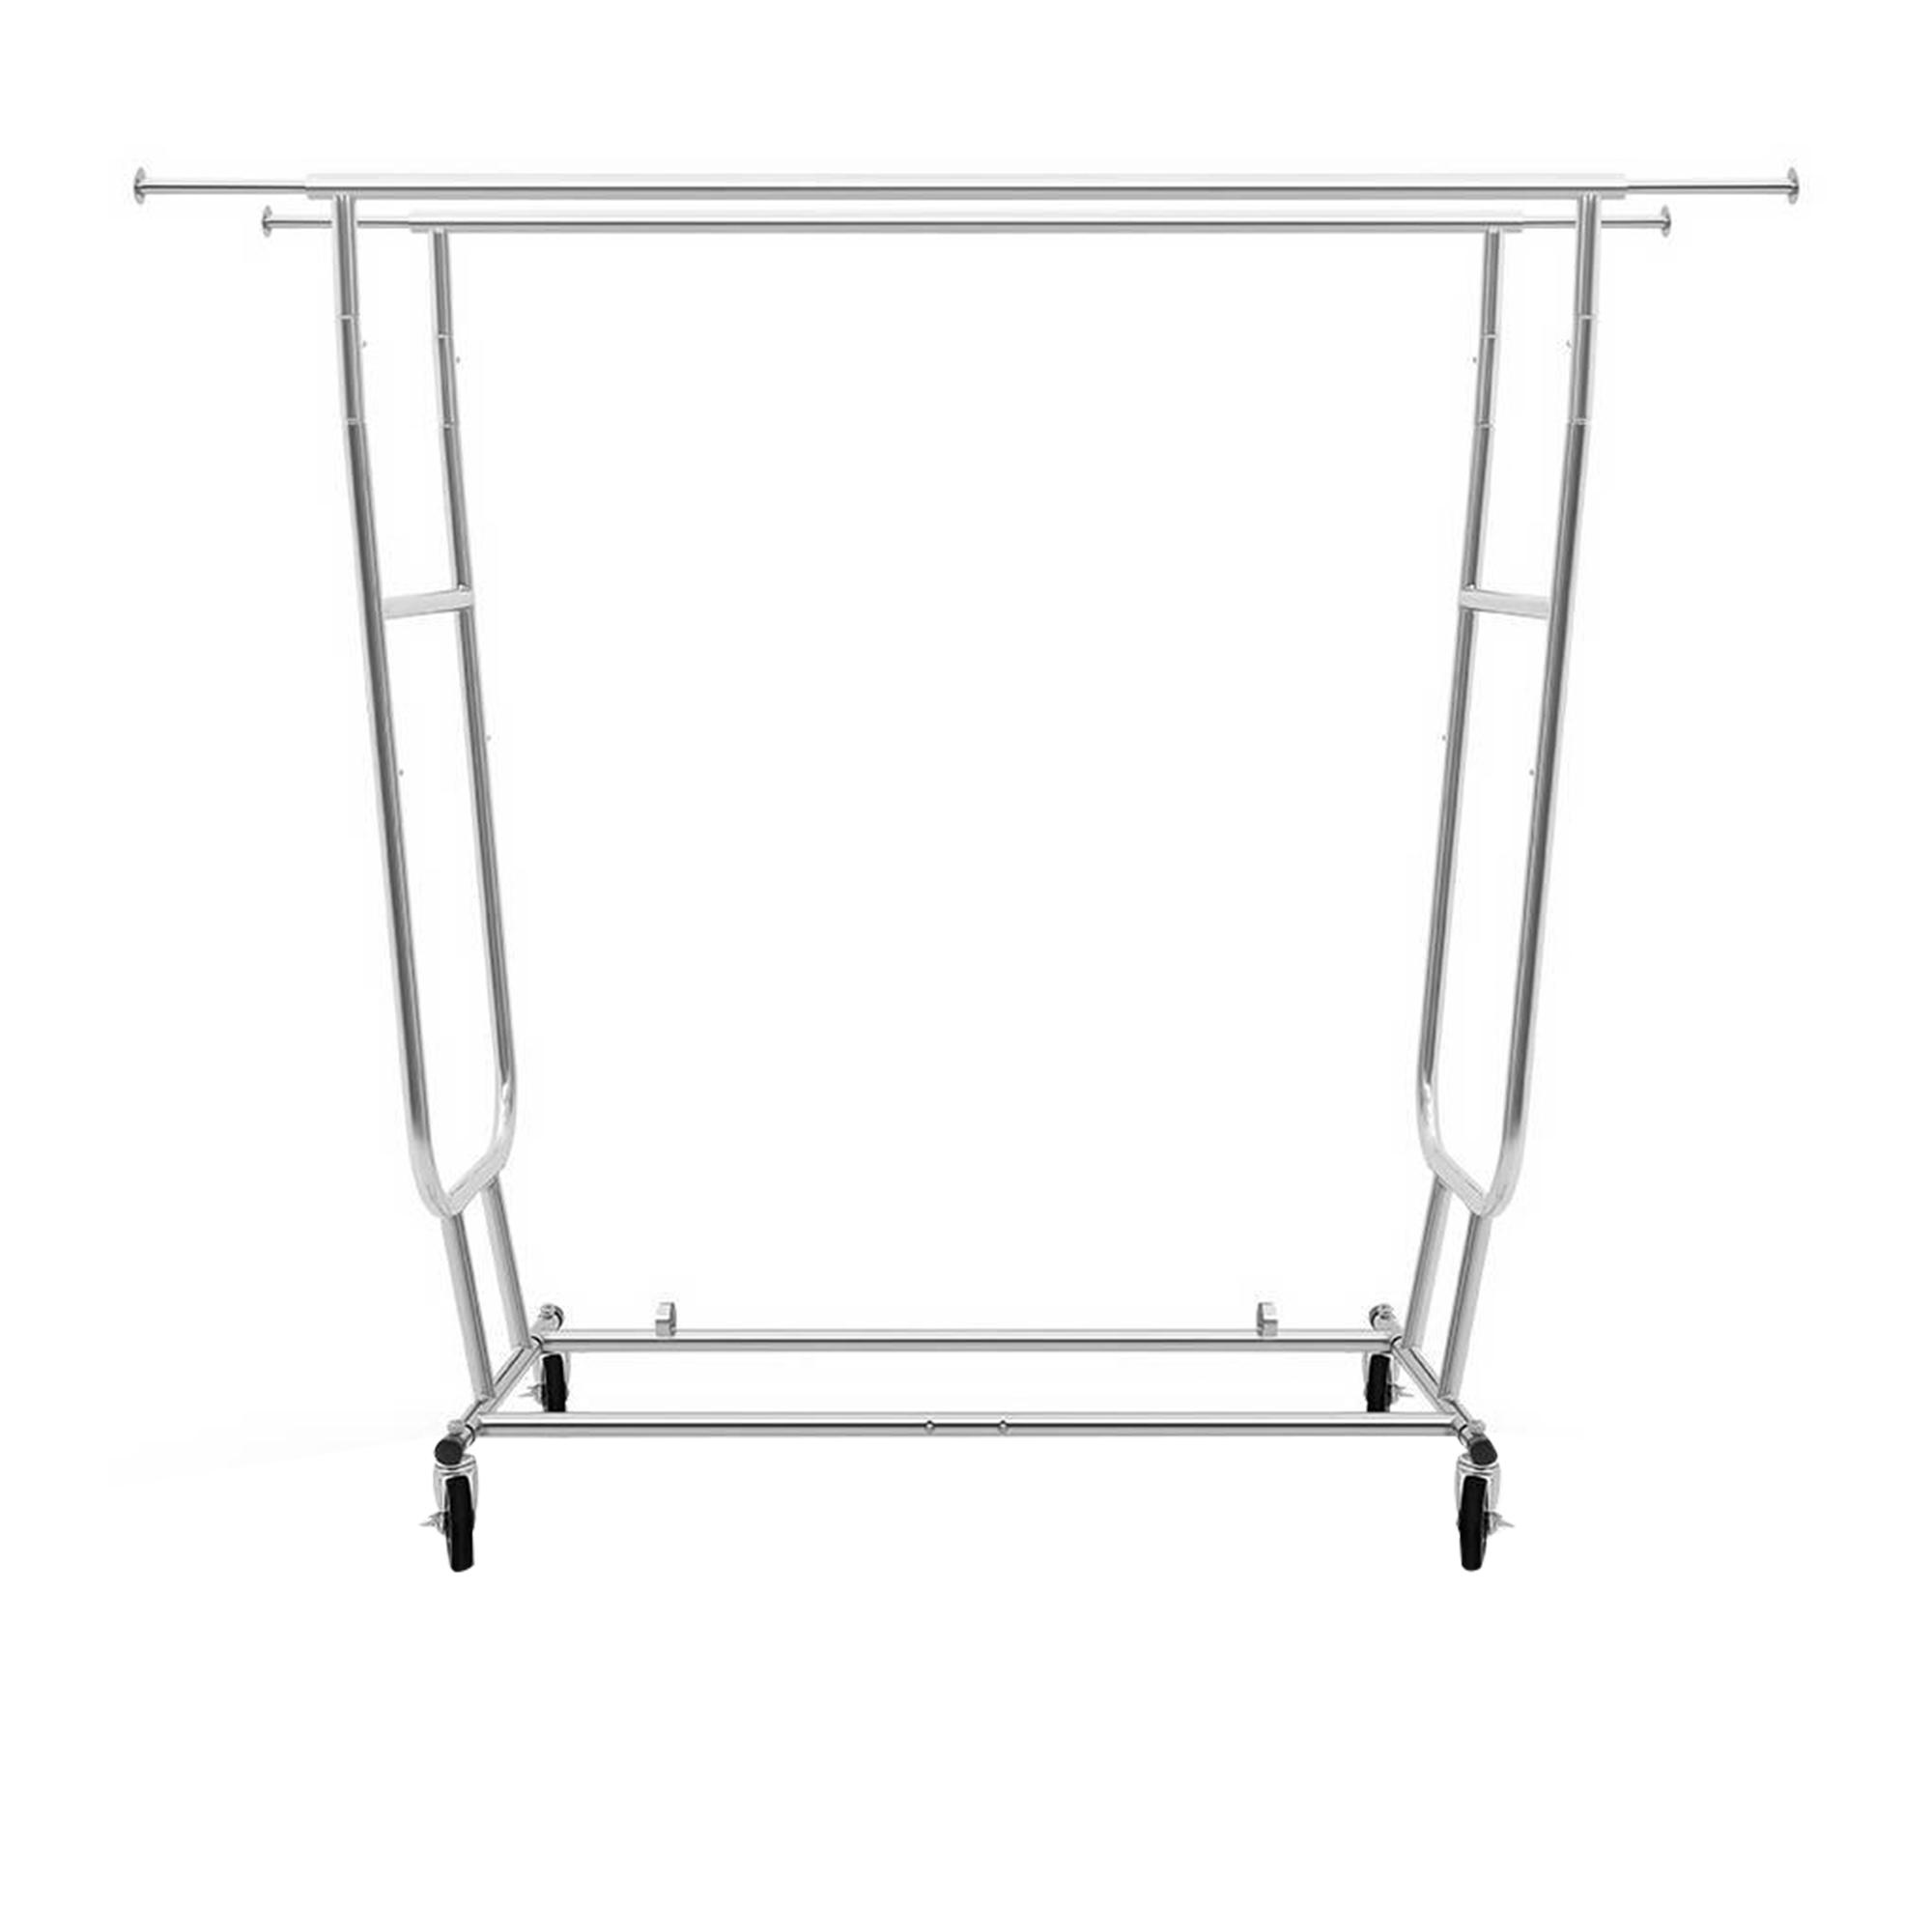 Artiss Double Rail Portable Clothes Drying Rack Silver Image 4